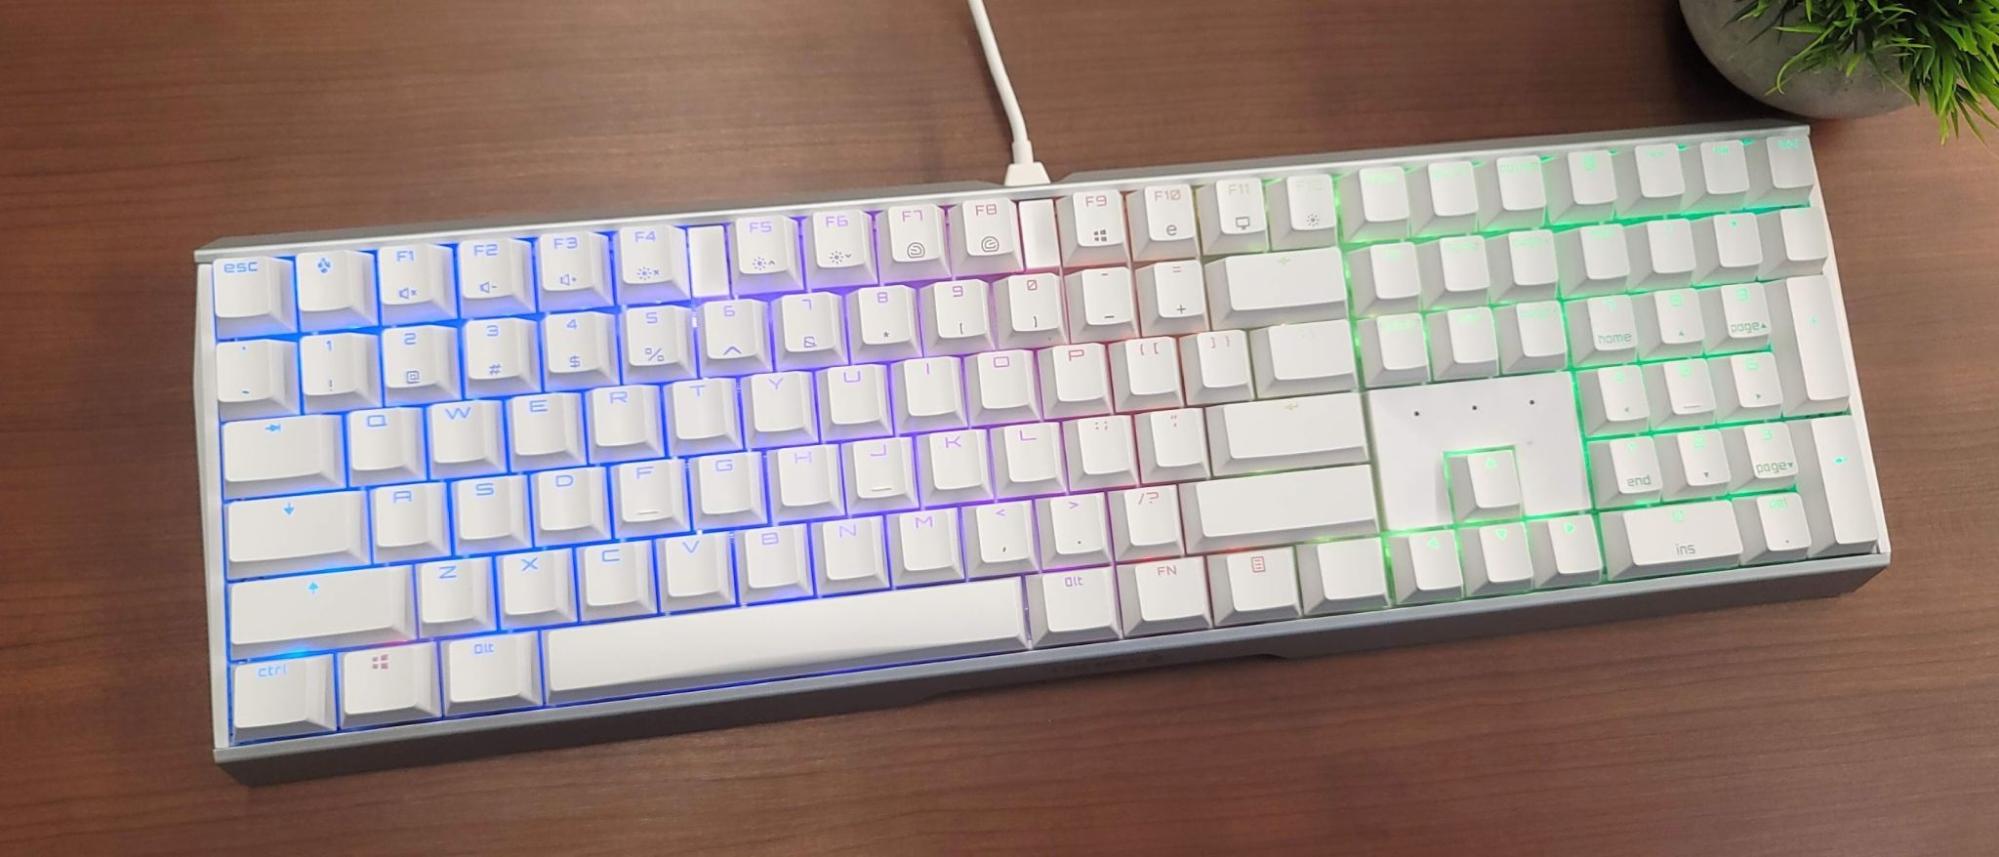 Cherry MX Board 3.0 S Keyboard Review: Bling and Ping | Tom's